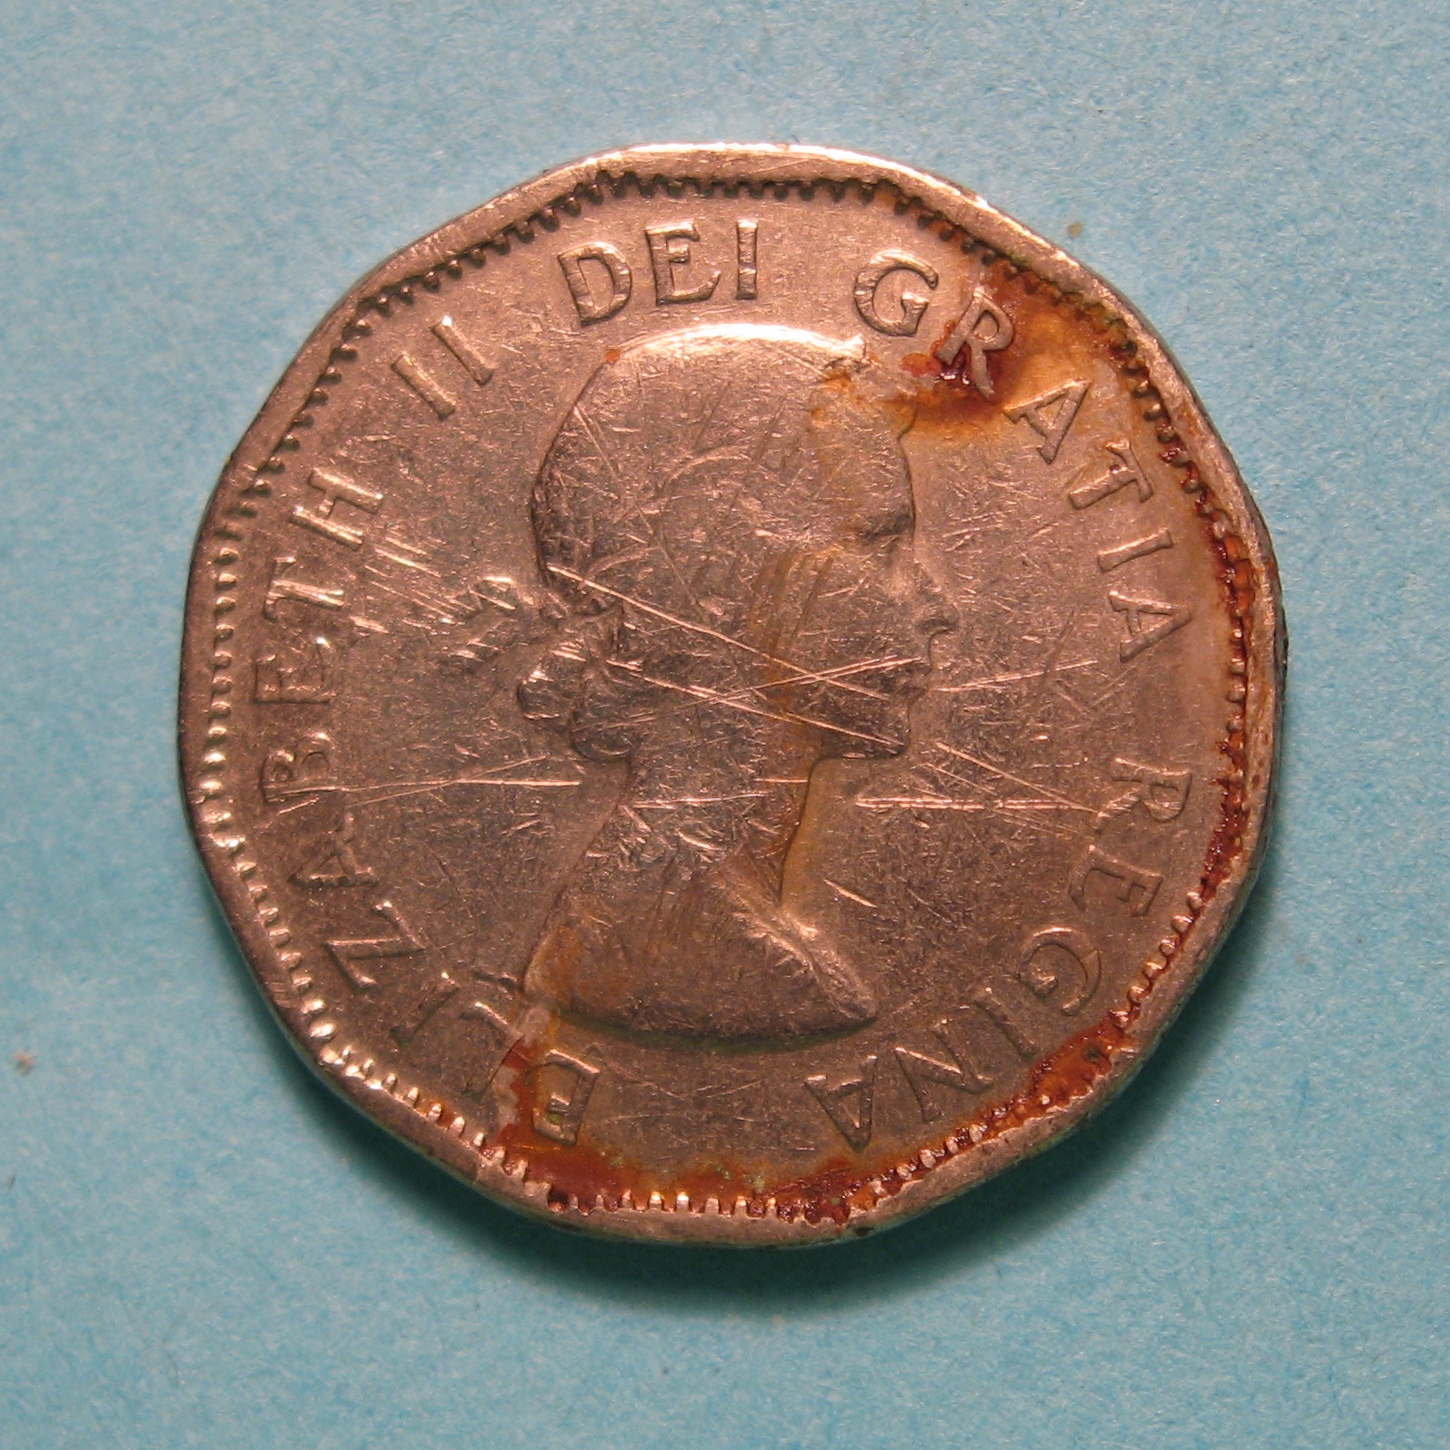 5-cents-1956-can-pm-tache-avers.jpg